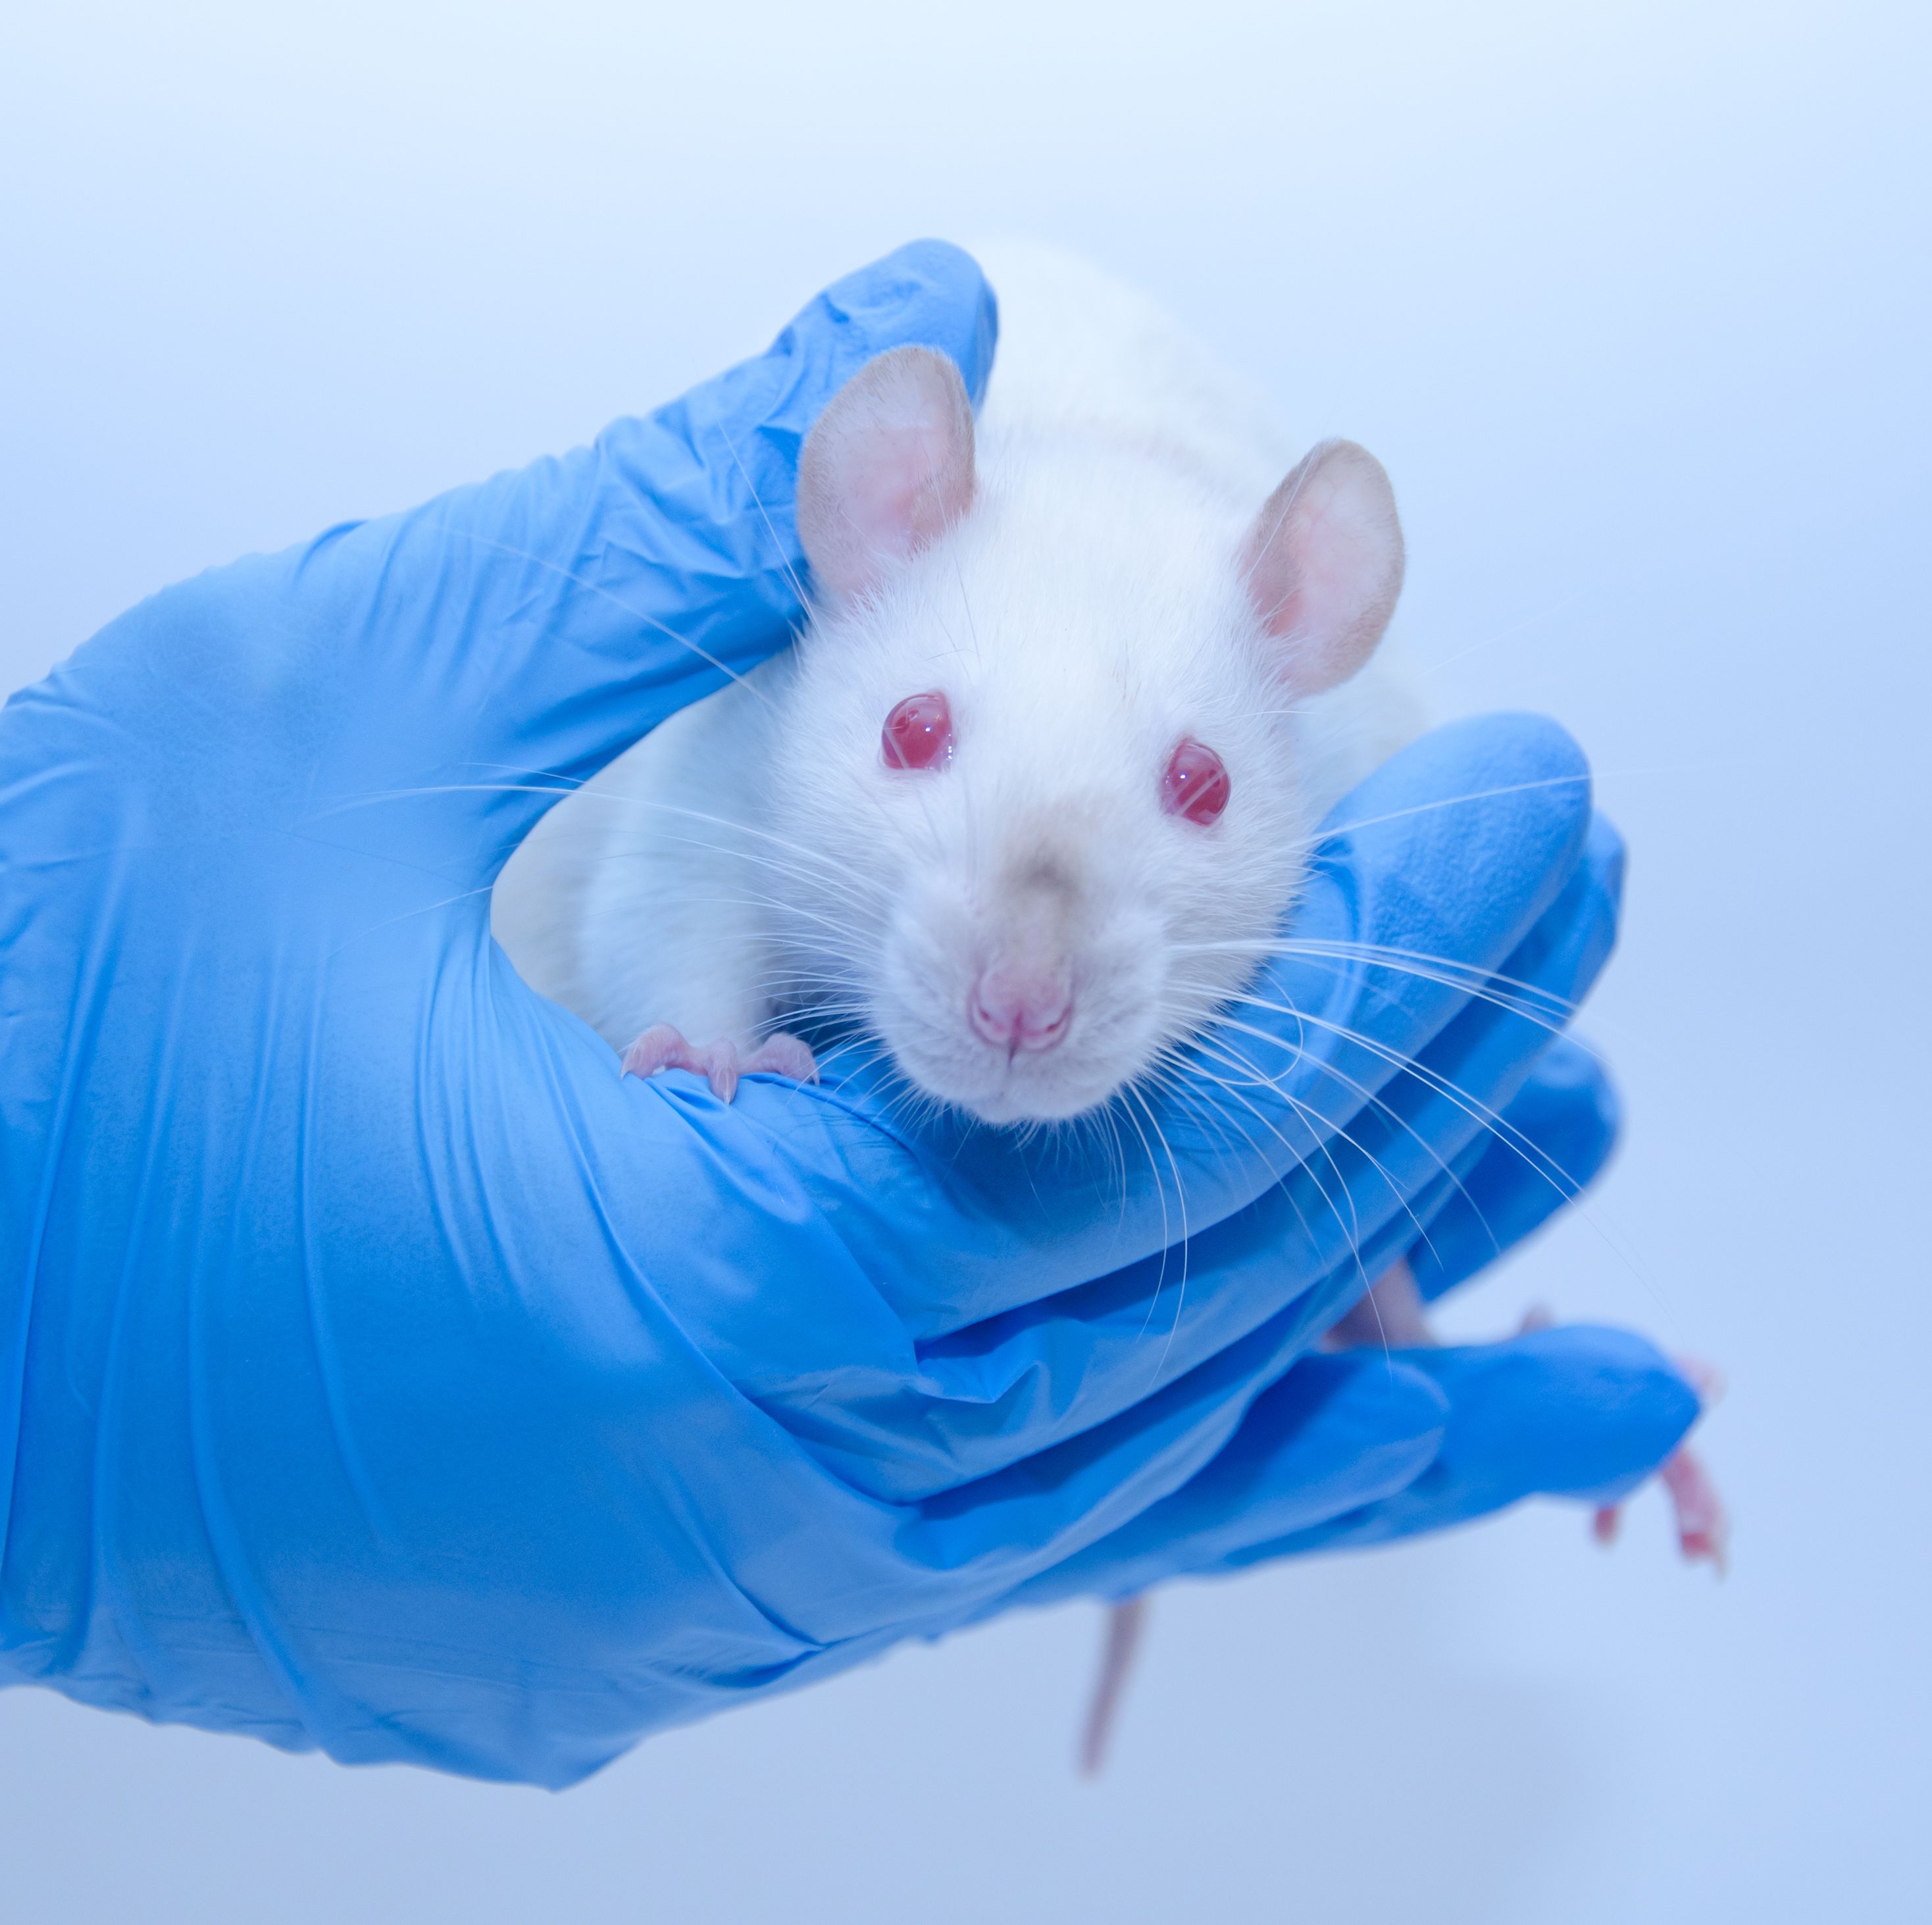 Scientists Just Reprogrammed Mice to Live Longer. Humans May Be Next.